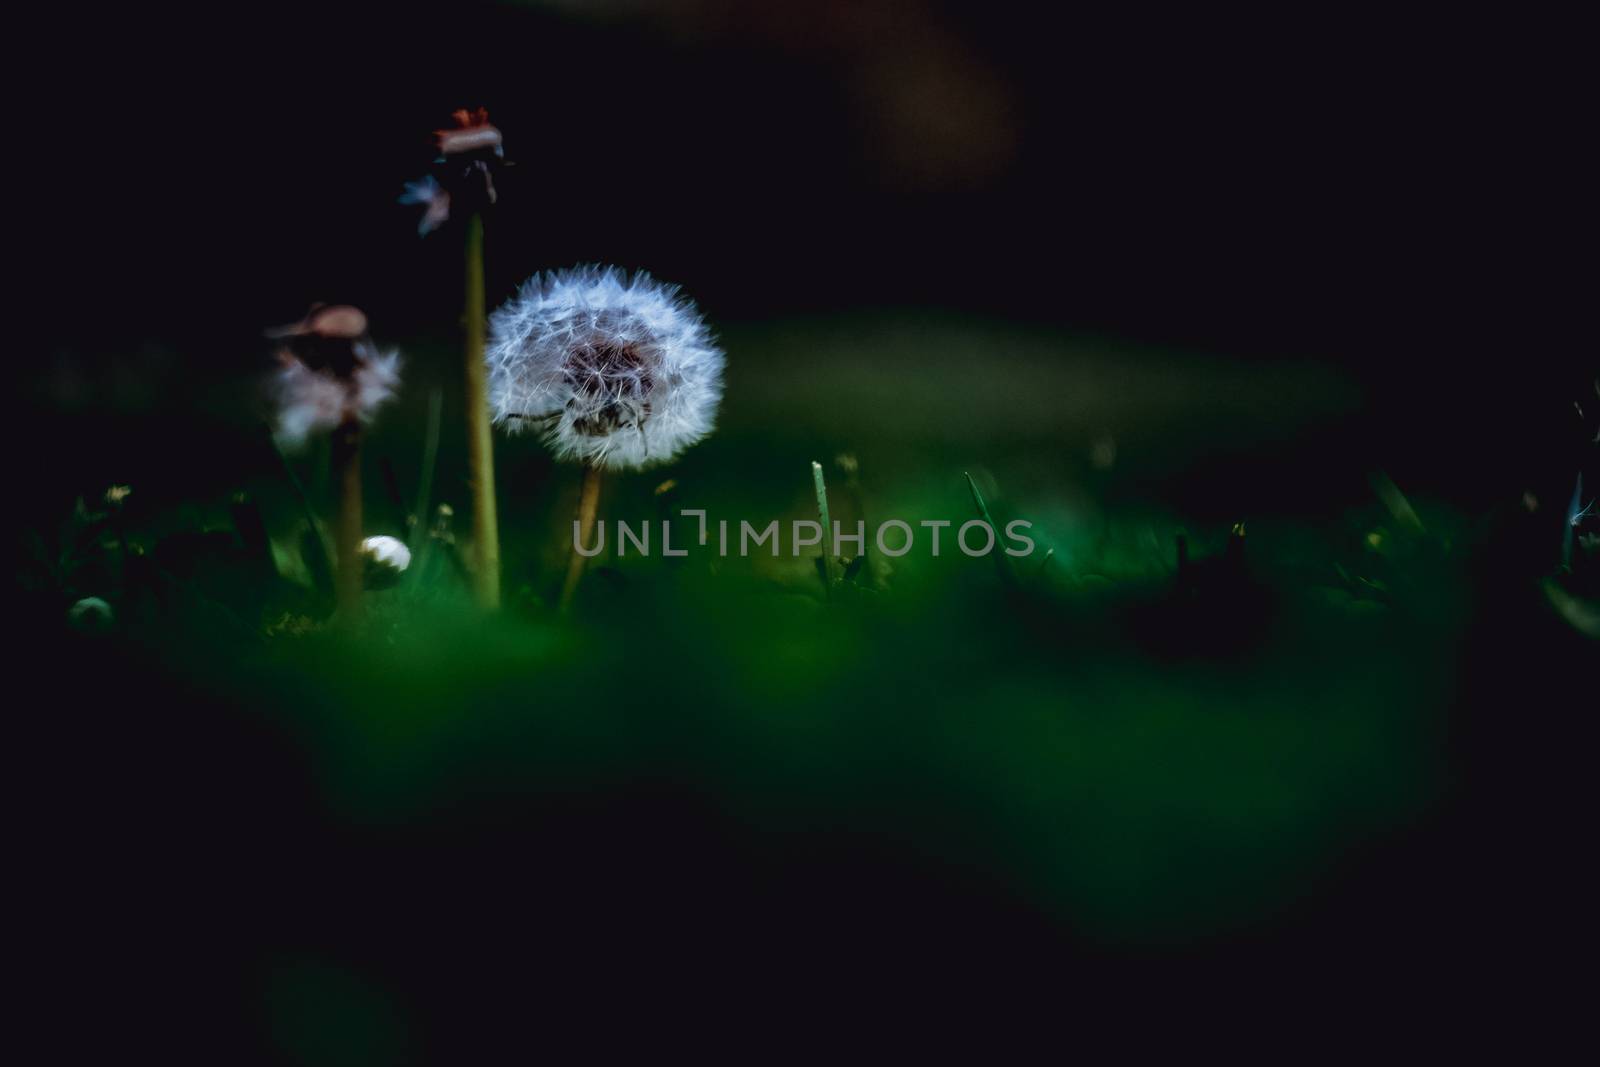 Three dandelions over green dark foreground and background in a public garden in Pamplona, Spain by mikelju